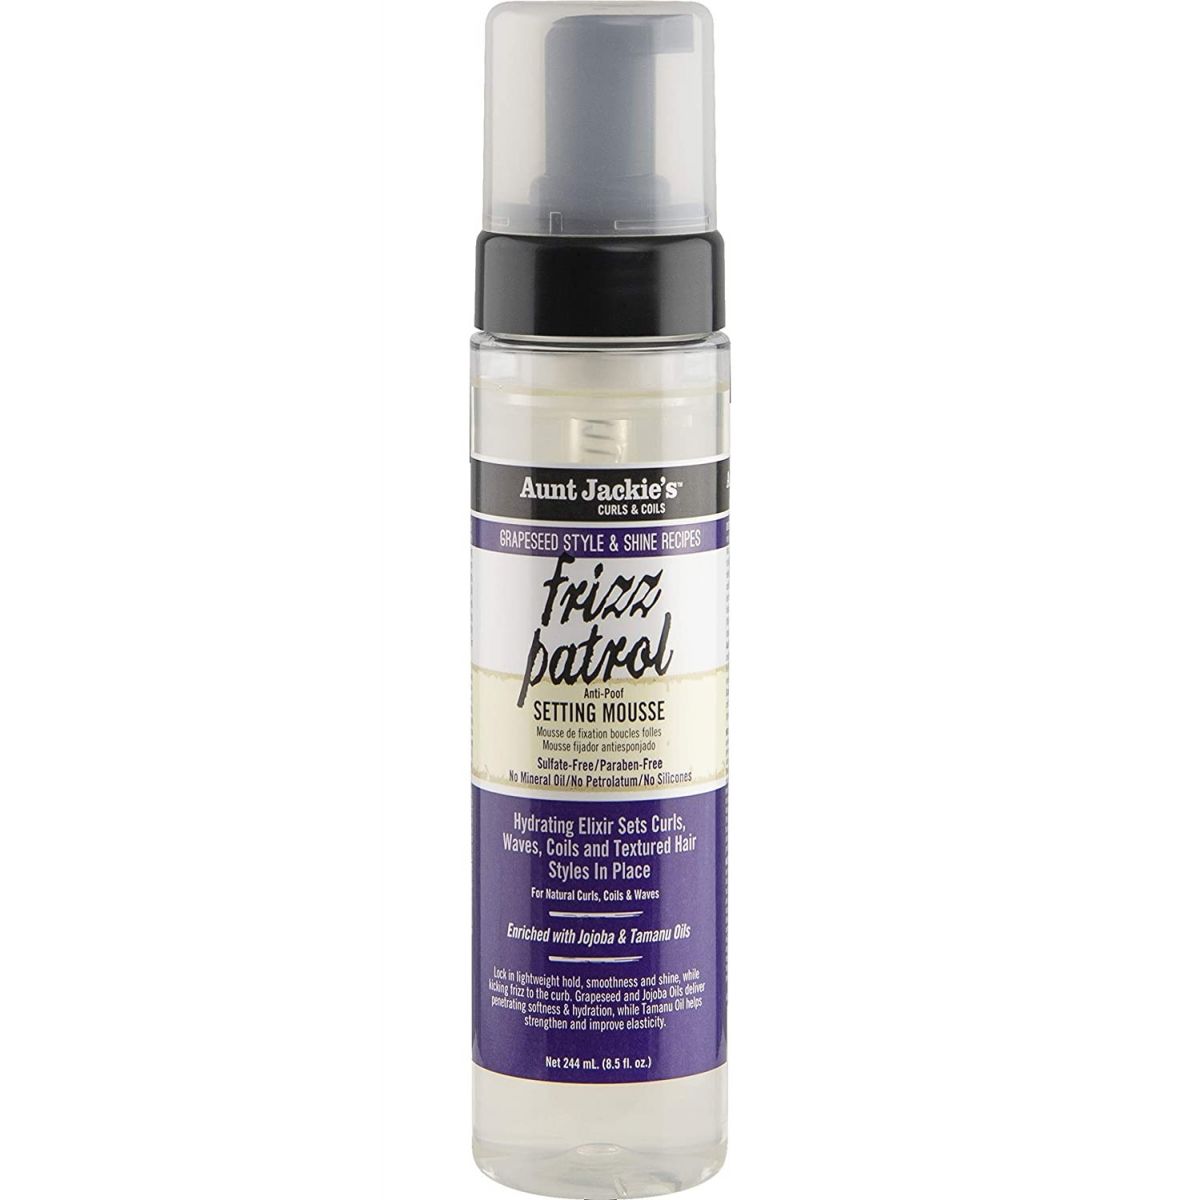 Tante Jackie's Grapeseed Frizz Patrol Anti Poof Twist & Curl Setting Mousse 244ml/8.5oz 